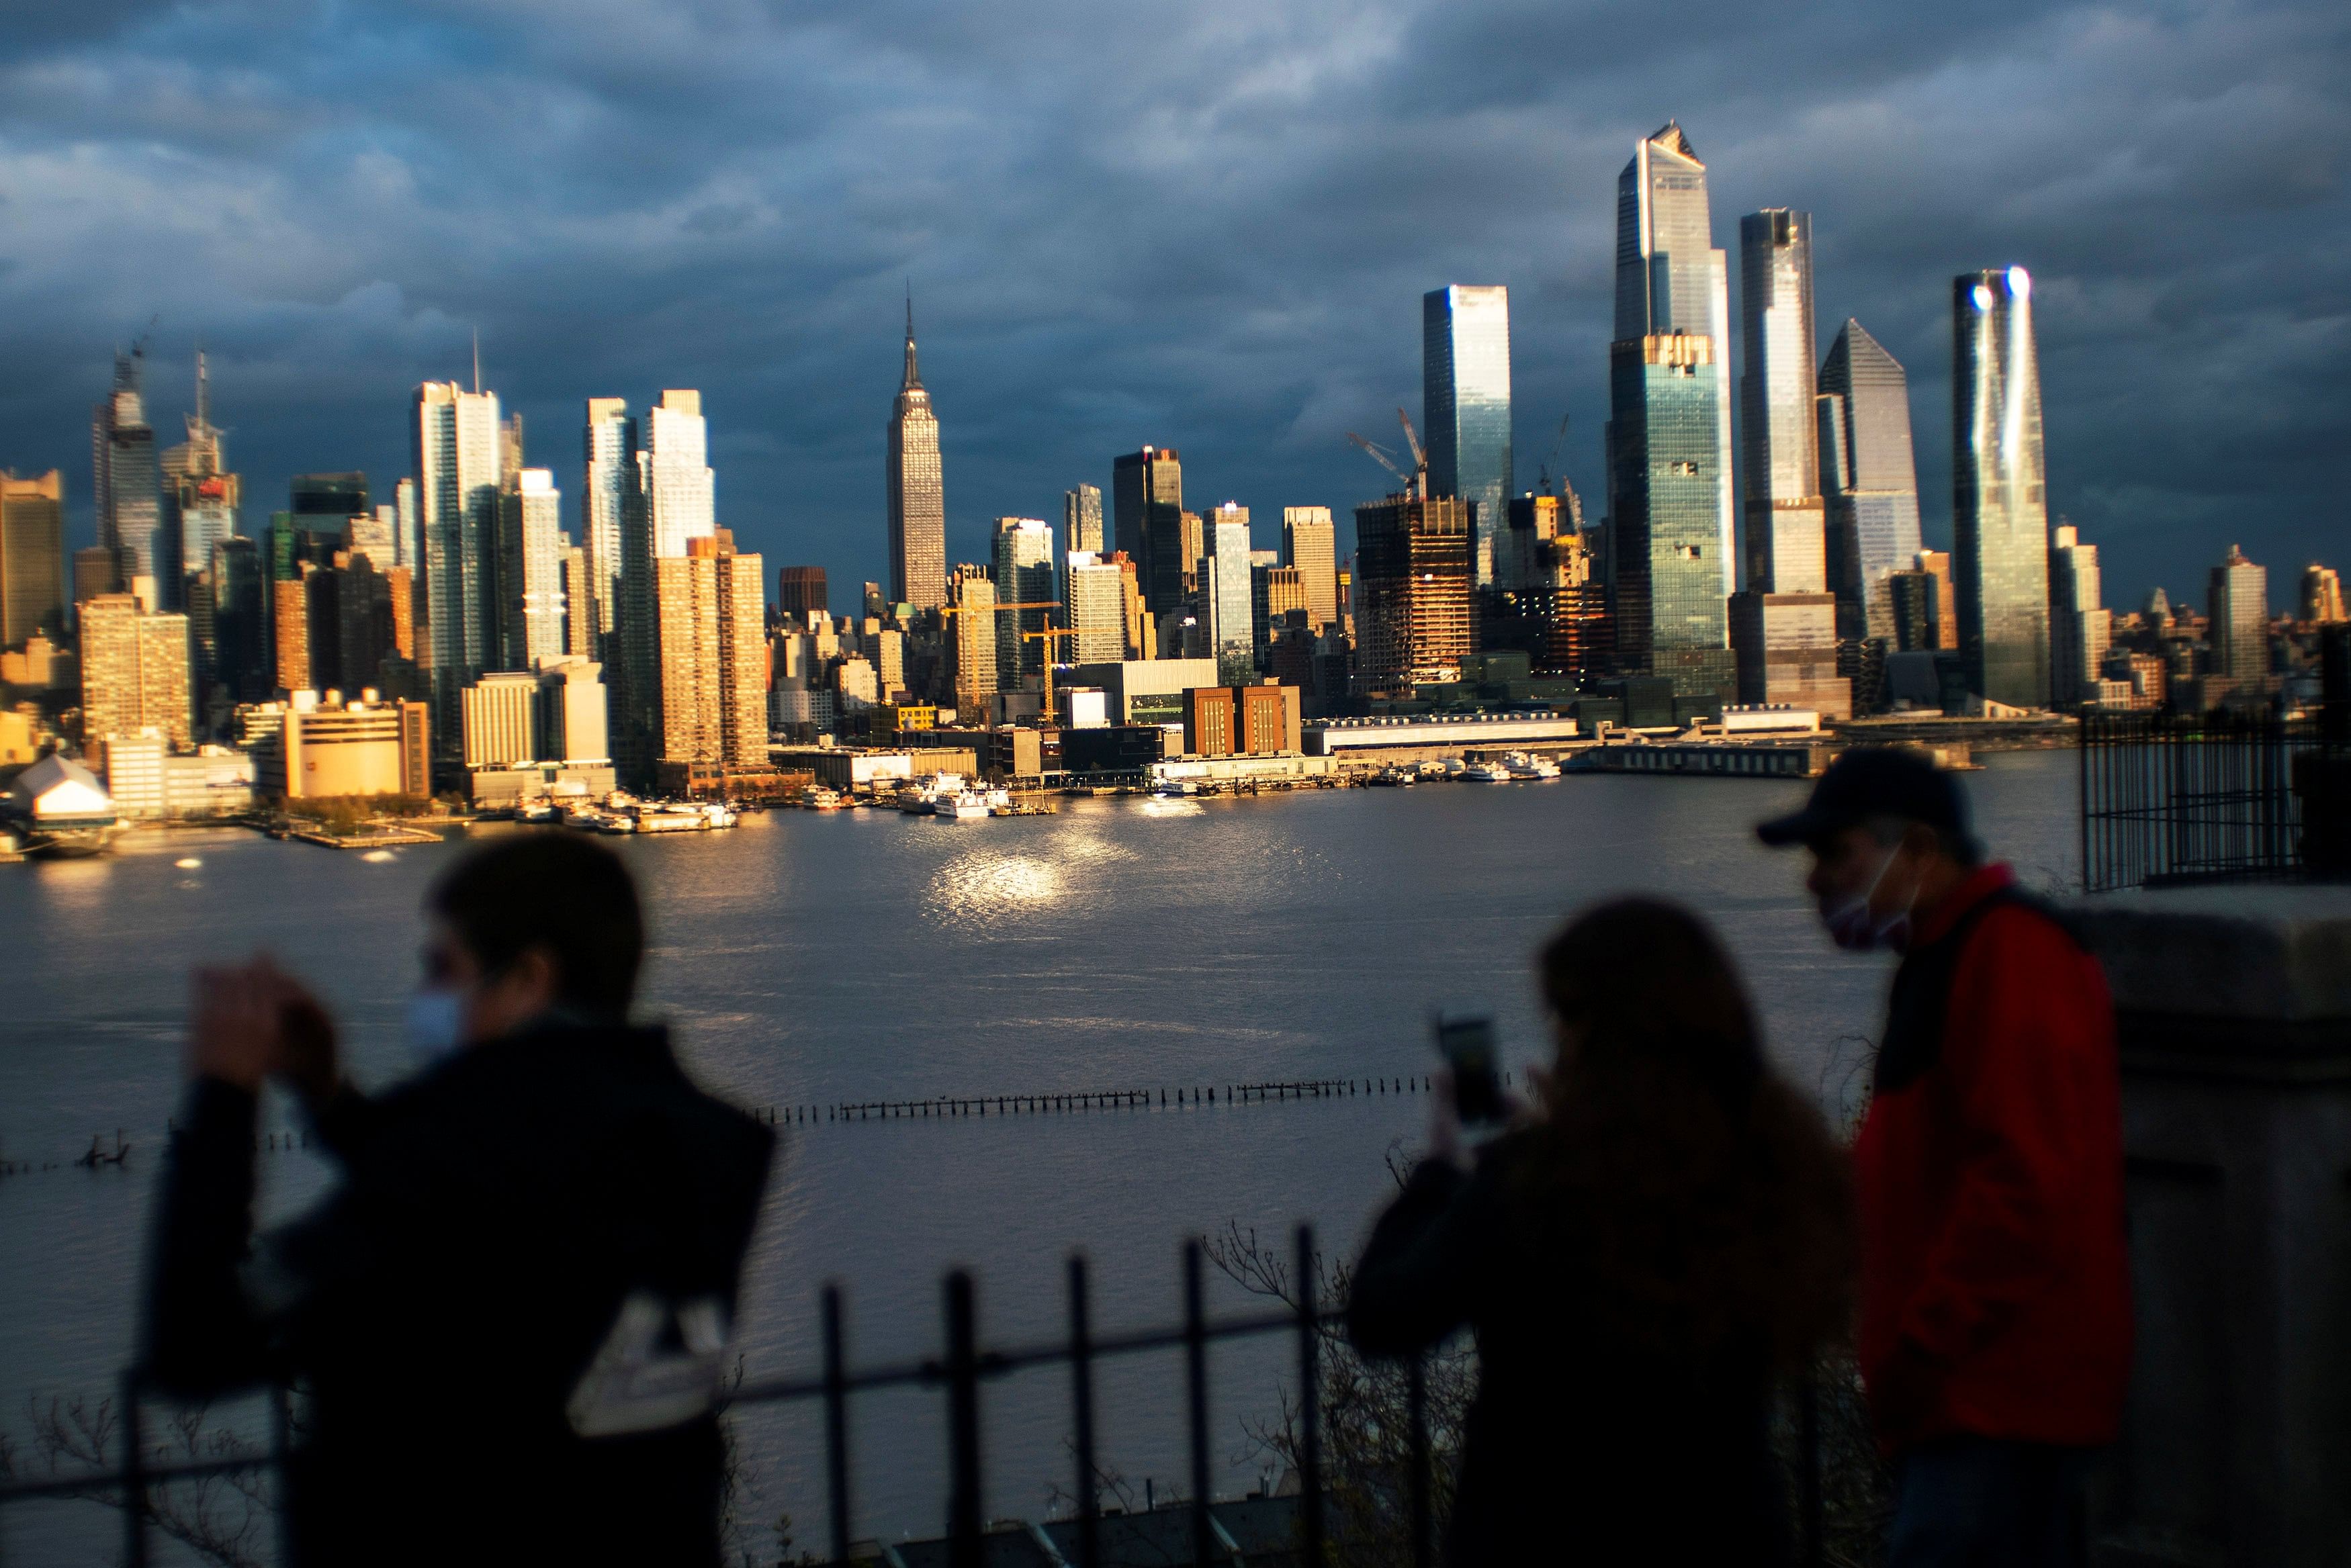 People take a look at the New York City skyline of Manhattan and the Hudson River during the outbreak of the coronavirus disease (COVID-19) in New York City, as seen from Weehawken, New Jersey. (Reuters Photo)